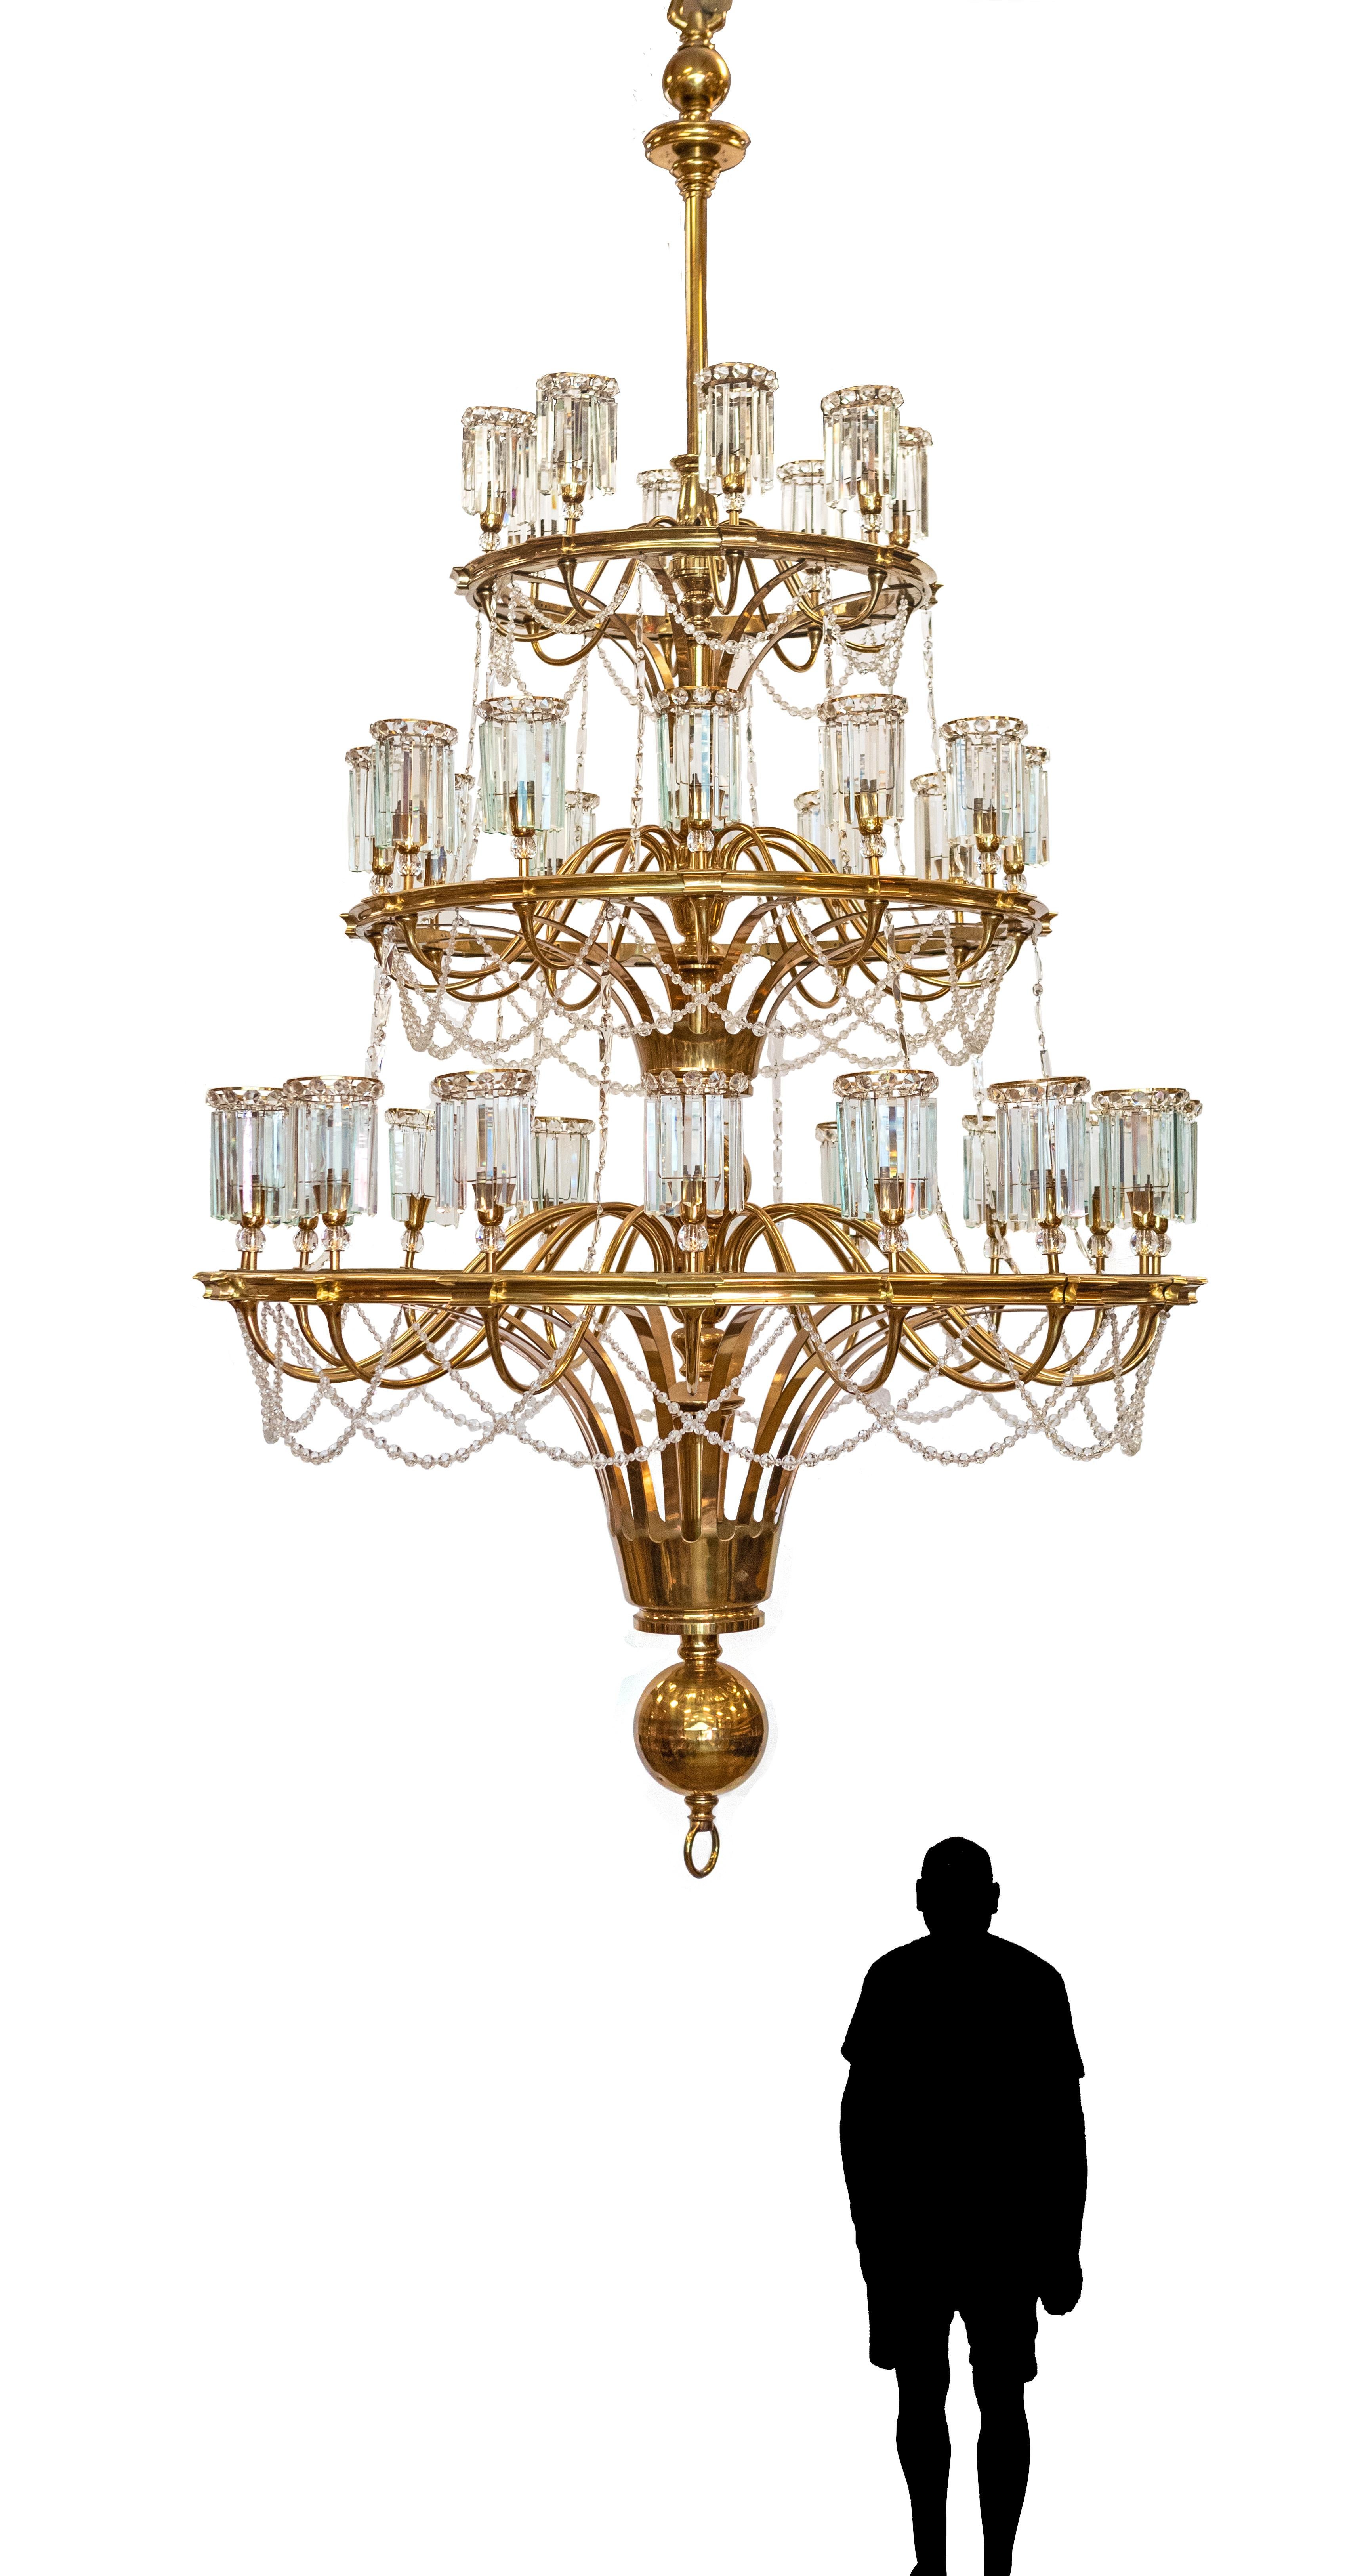 British Giant Reclaimed Brass & Crystal Chandelier  >4m Tall For Sale